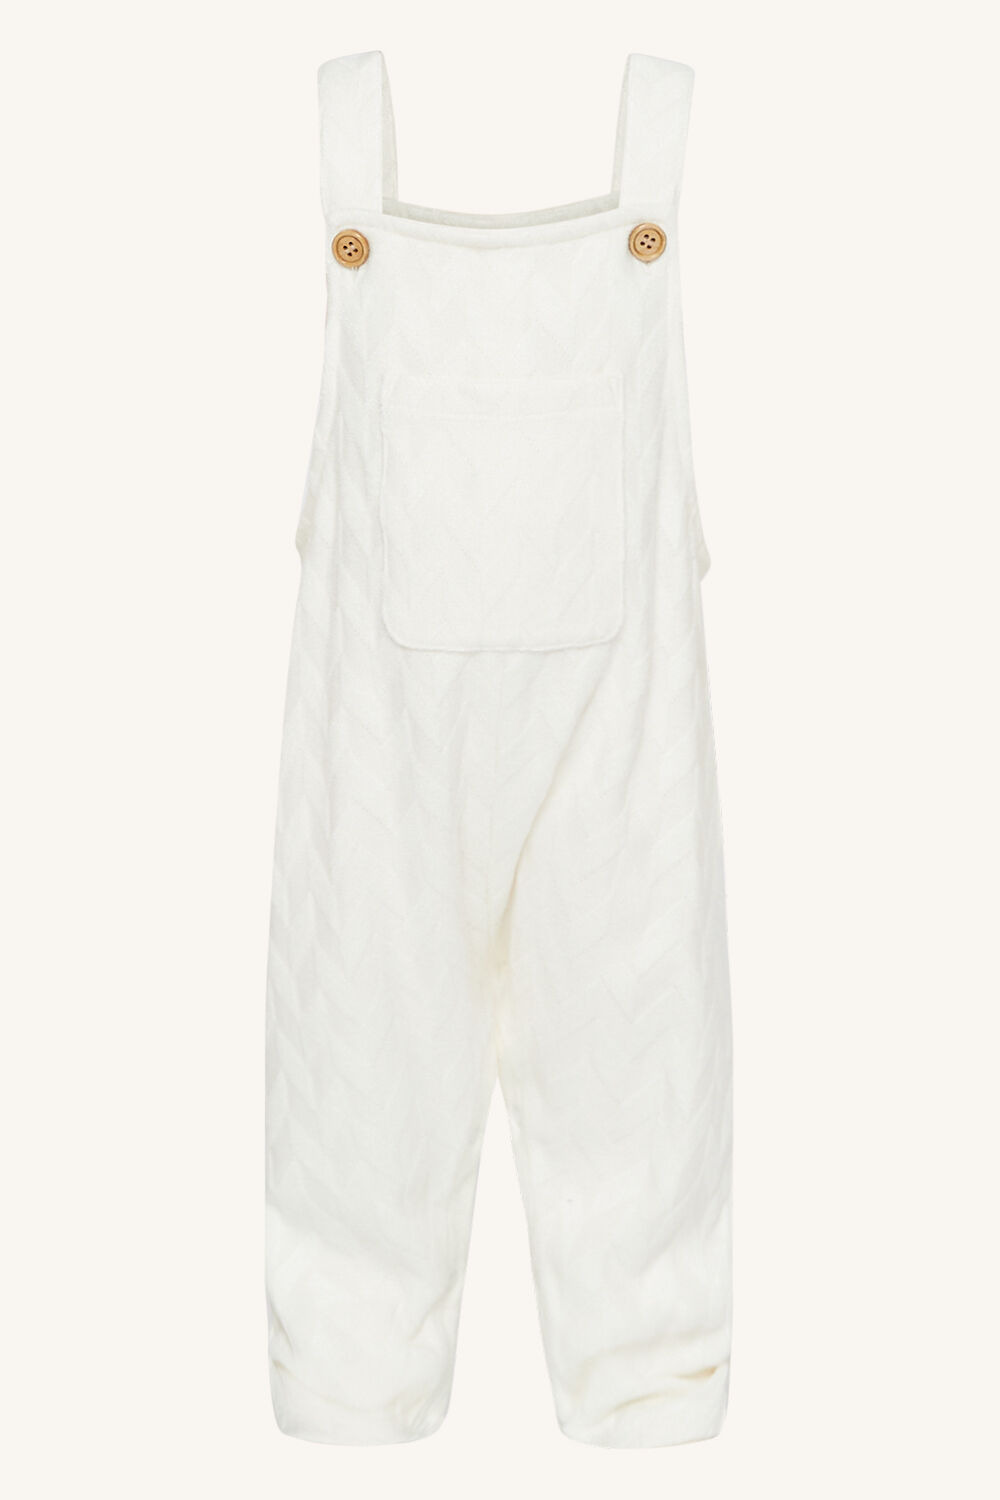 BABY GIRL SIENNA KNIT OVERALLS in colour CLOUD DANCER